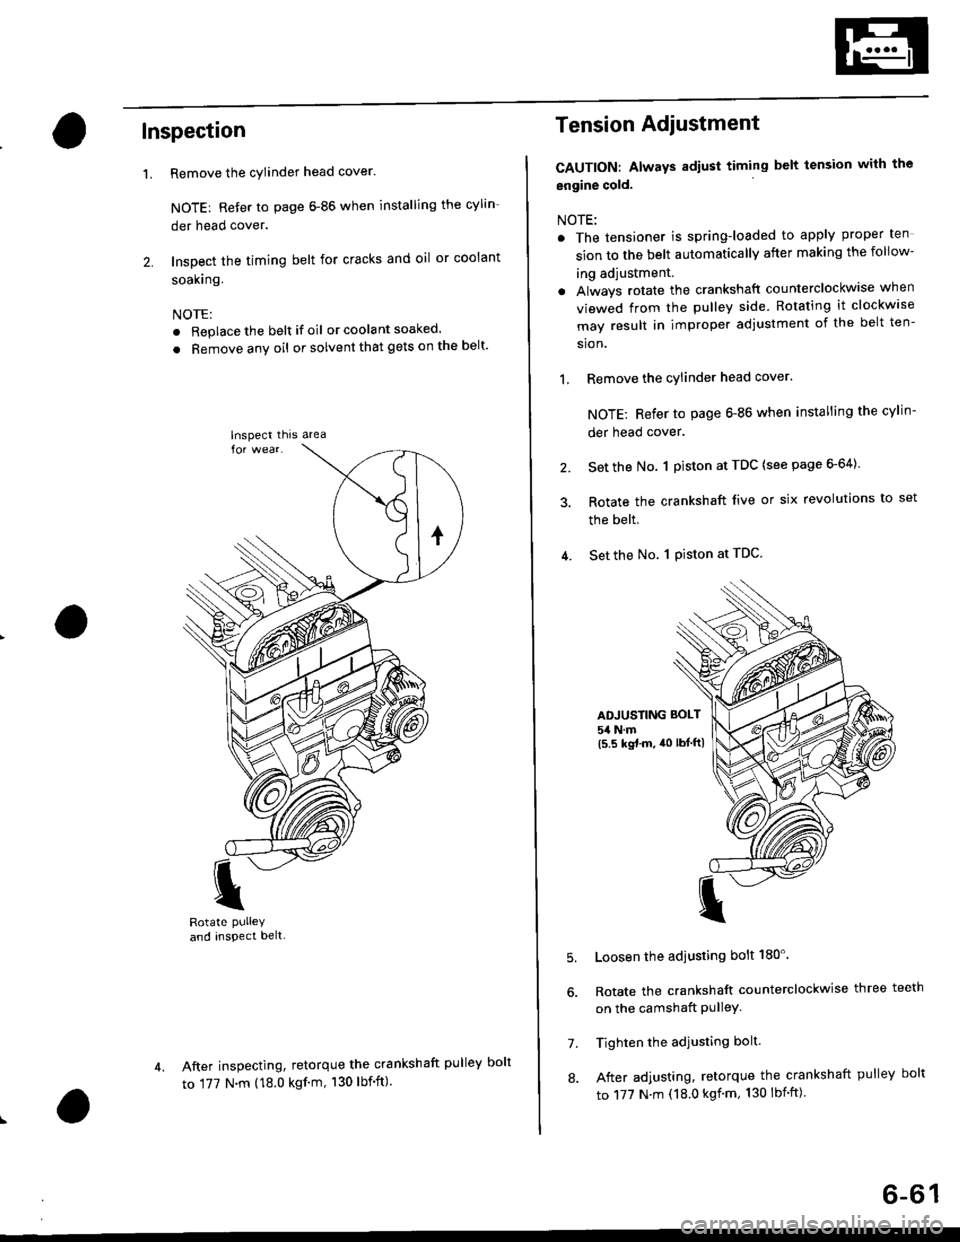 HONDA CIVIC 1999 6.G User Guide Inspection
Remove the cylinder head cover.
NOTE: Refer to page 6-86 when installing the cylin-
der head cover.
Inspect the timing belt for cracks and oil or coolant
soakrng.
NOTE:
. Replace the belt i